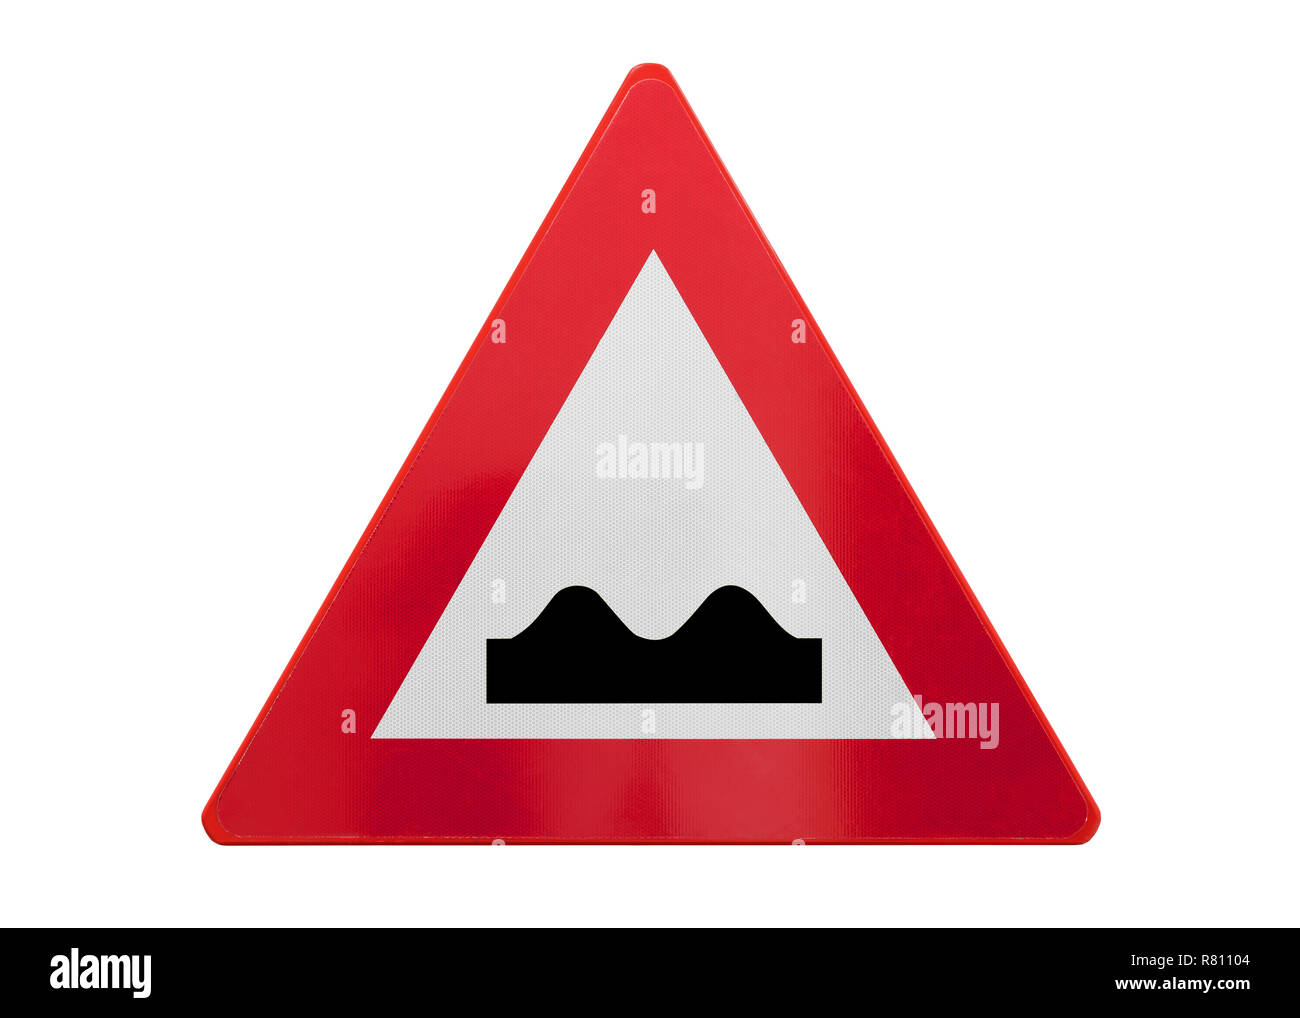 Traffic sign isolated - Bumpy road ahead - Isolated on white Stock Photo